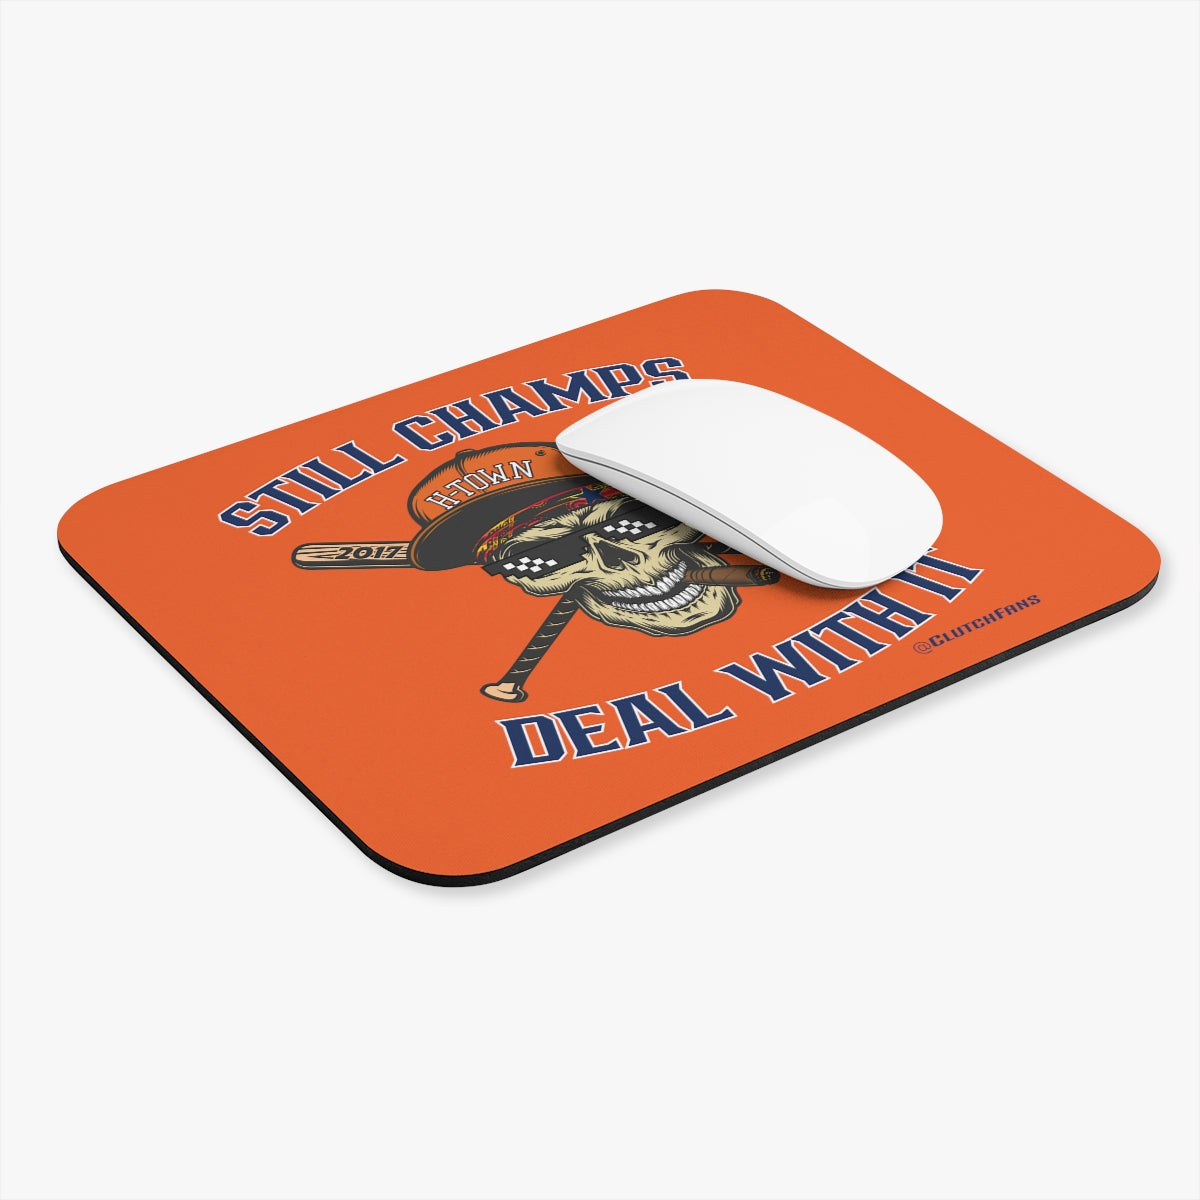 STILL CHAMPS: Deal With It!: Mouse Pad